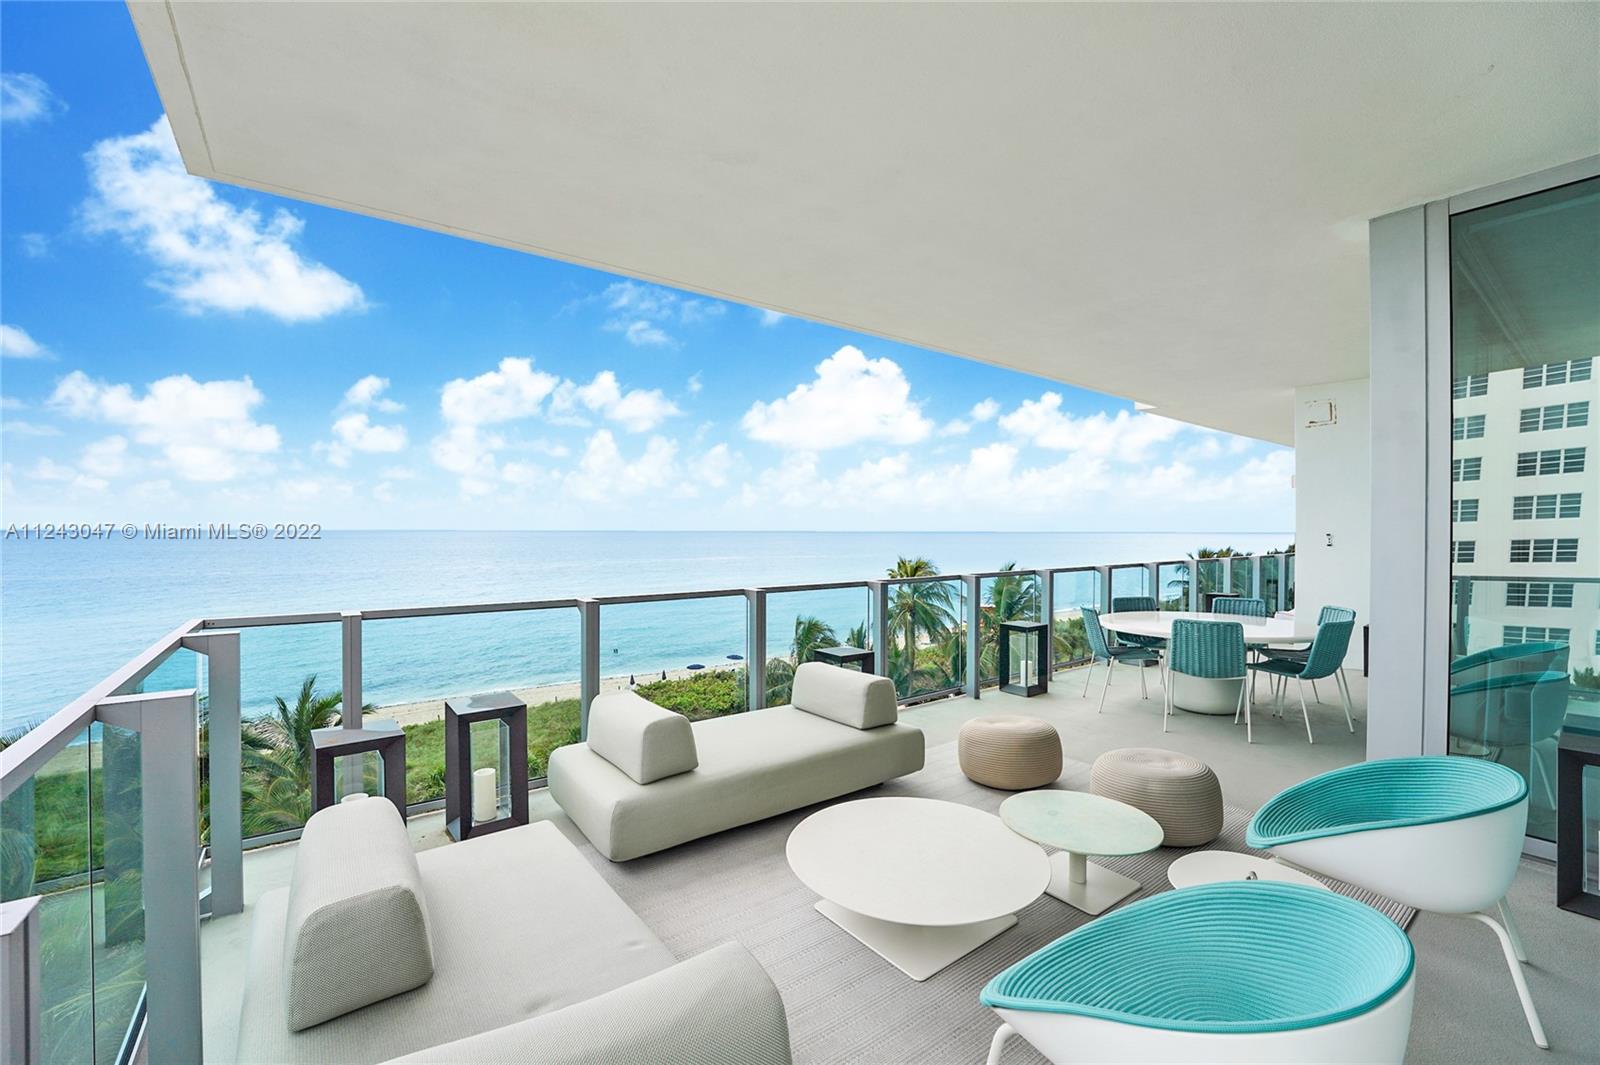 Listing Image 6901 Collins Ave #501